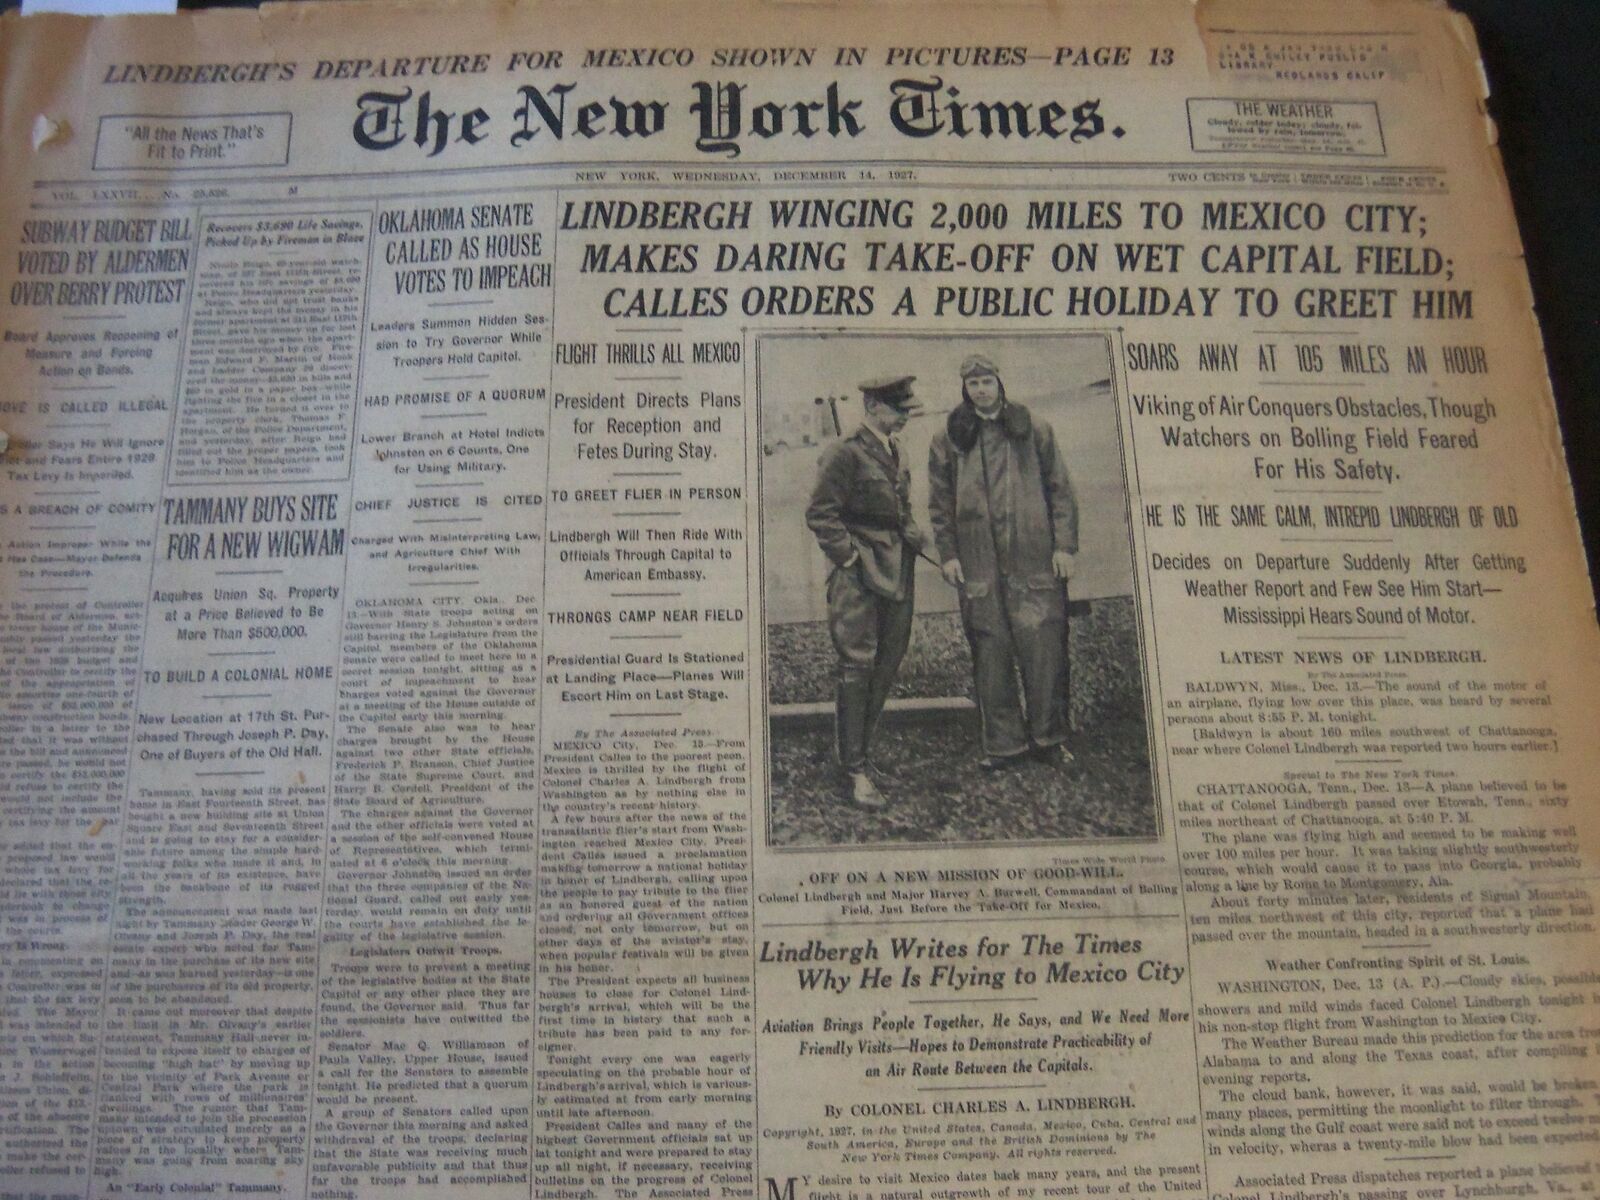 1927 DECEMBER 14 NEW YORK TIMES - LINDBERGH TO MEXICO WRITES FOR TIMES - NT 6291